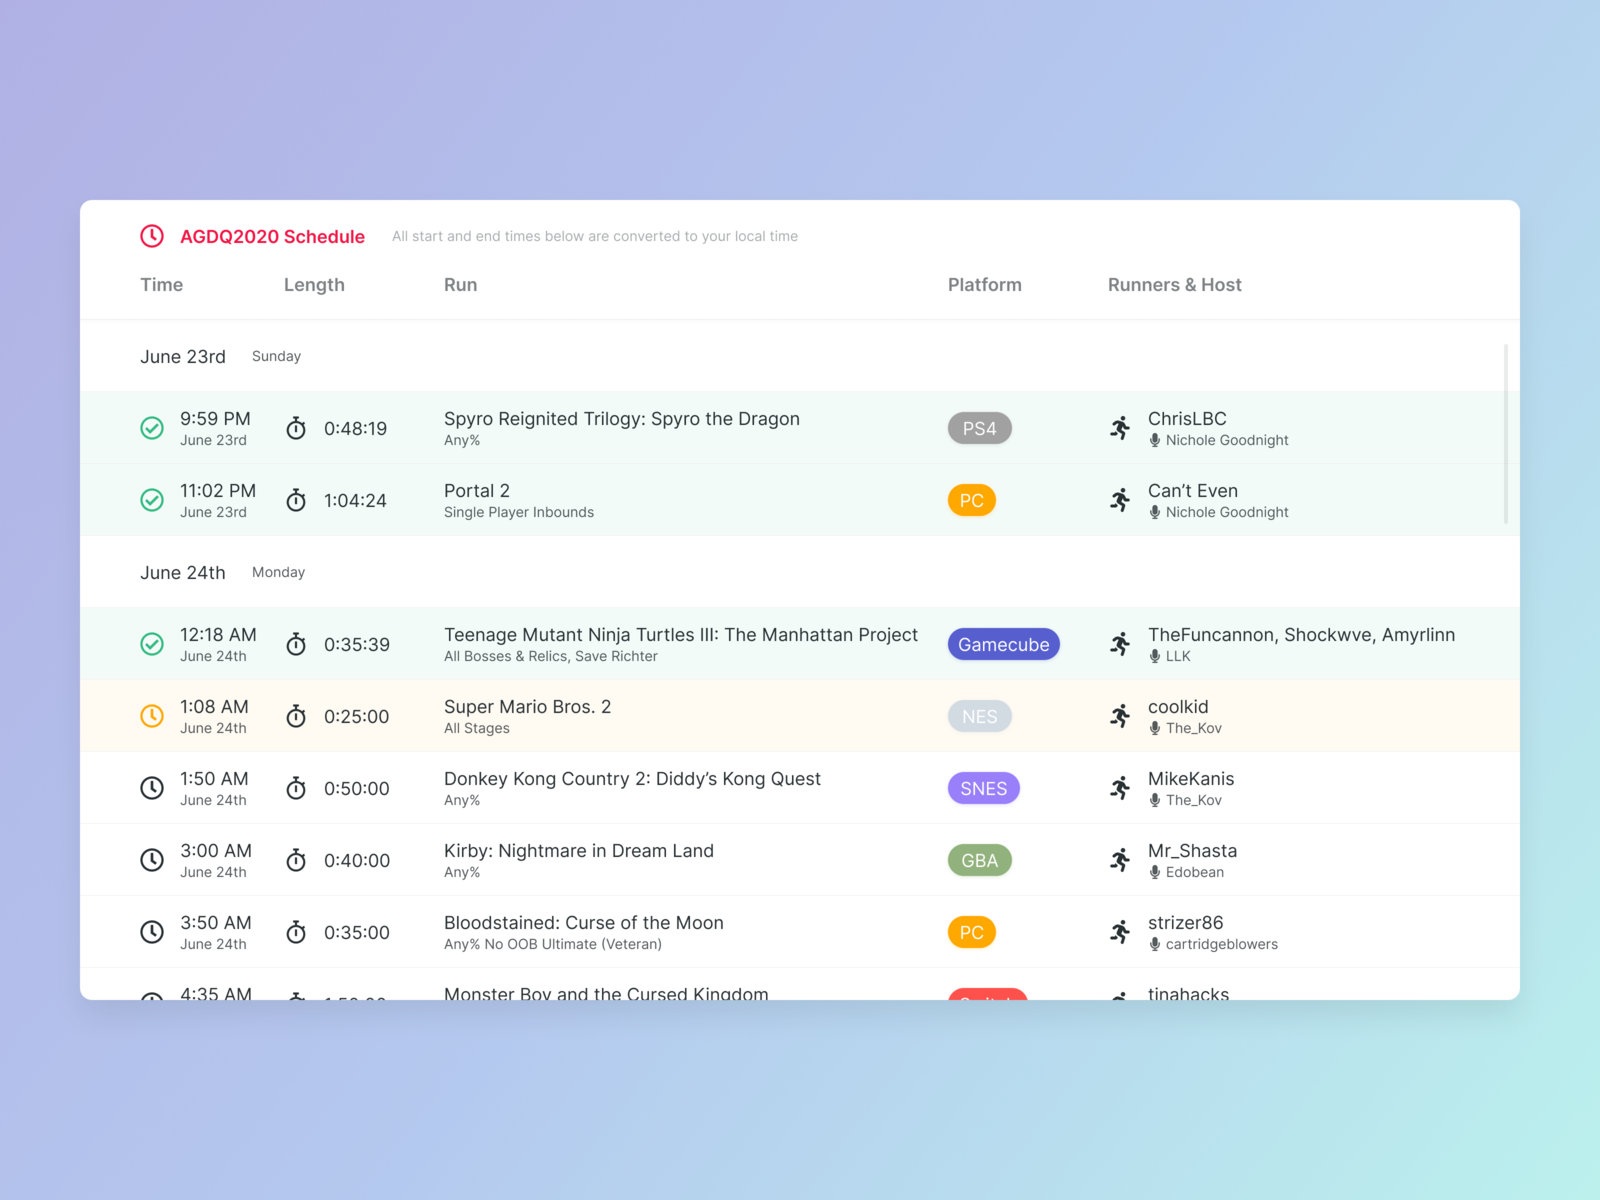 AGDQ2020 Schedule Redesign by Dan Adatai on Dribbble